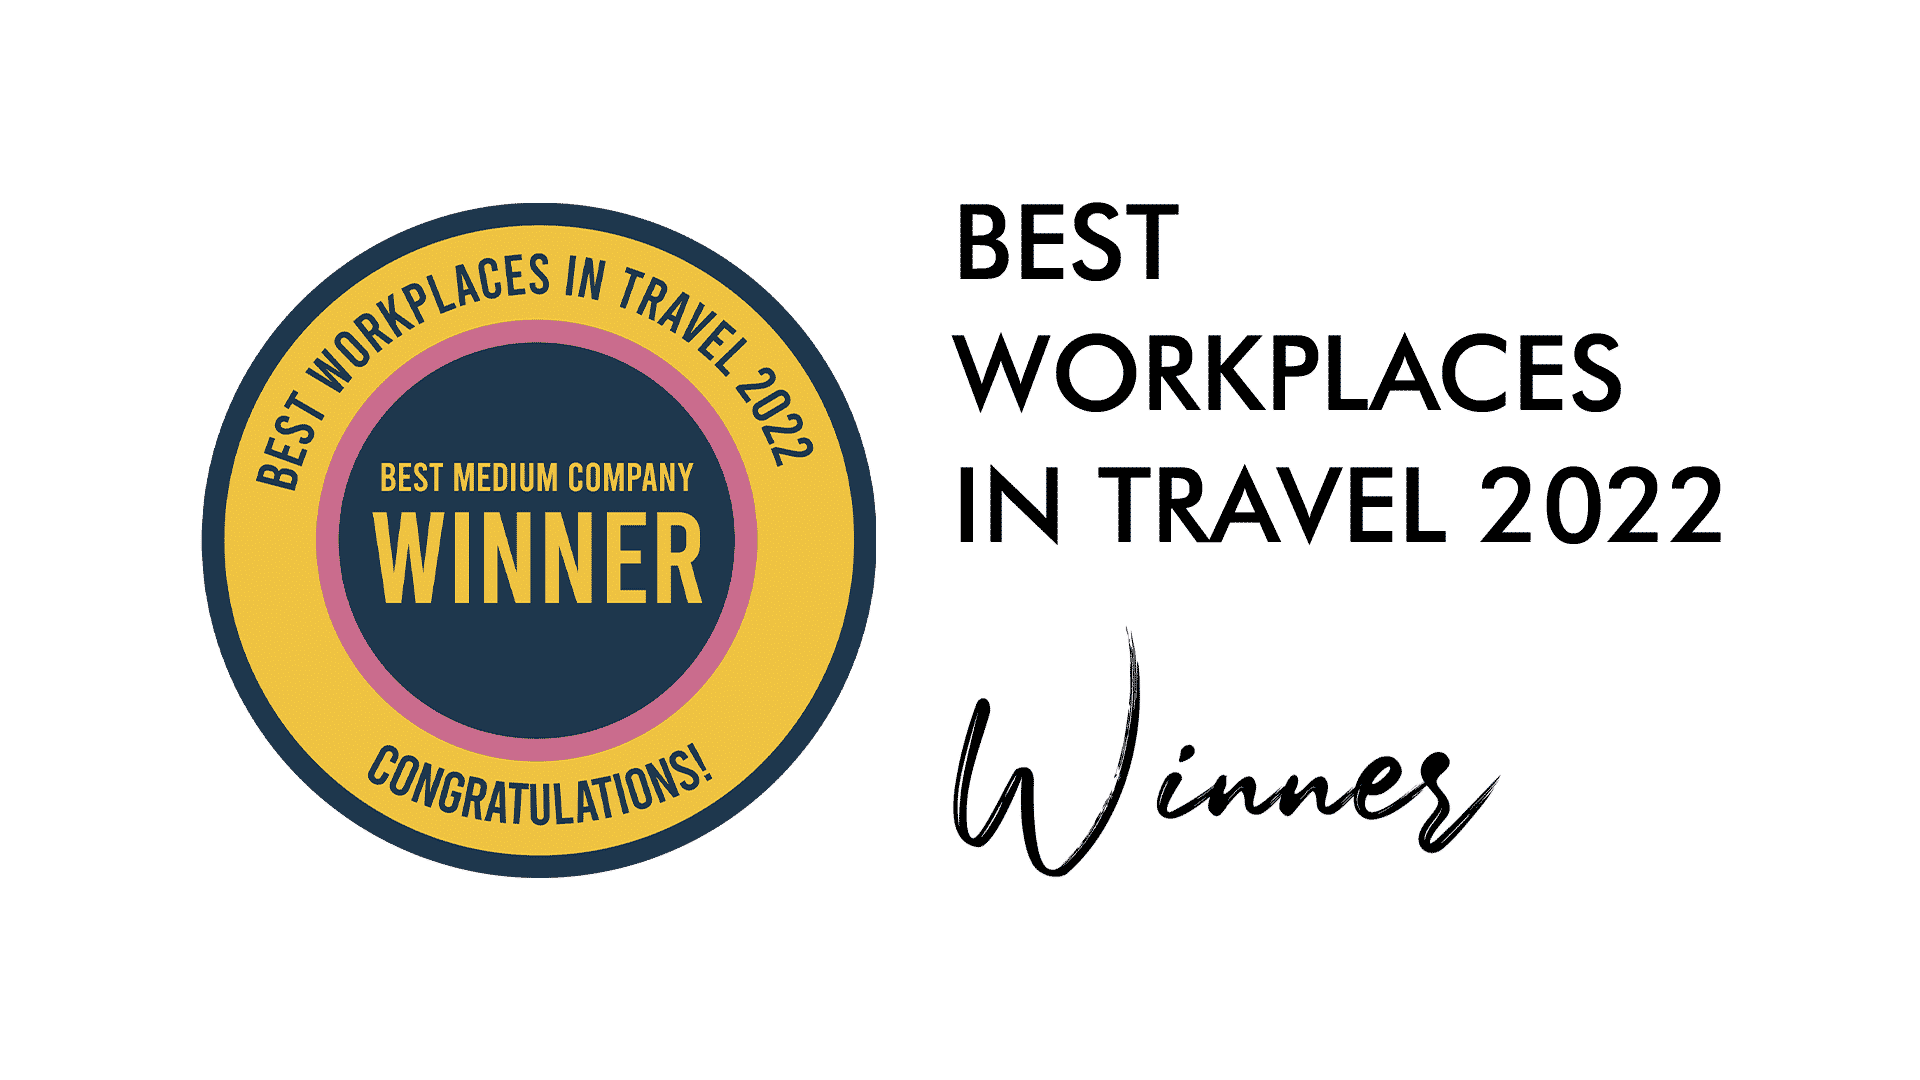 Best Place to Work in Travel 2022